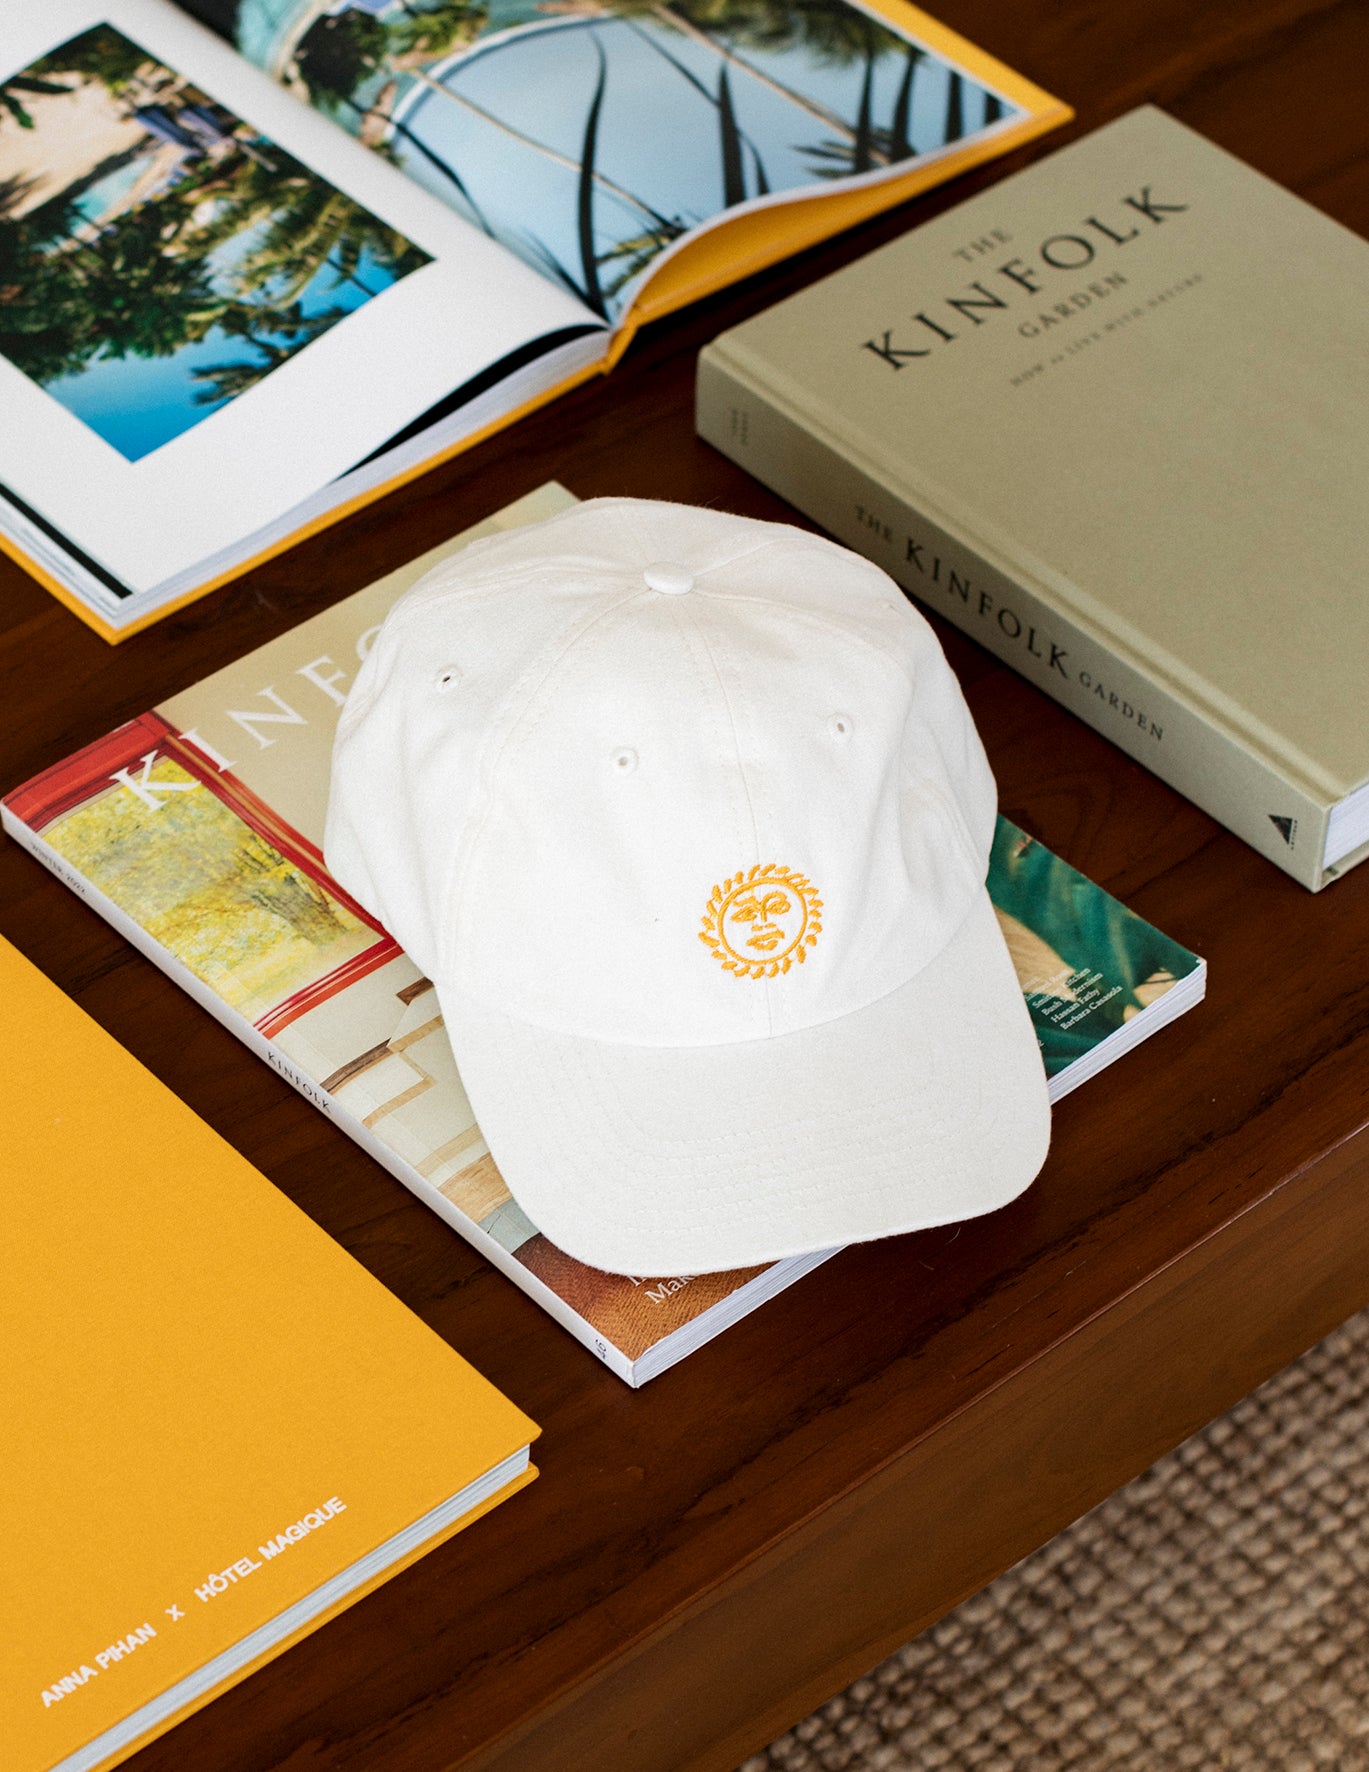 The Pleasure of Leisure holiday cap